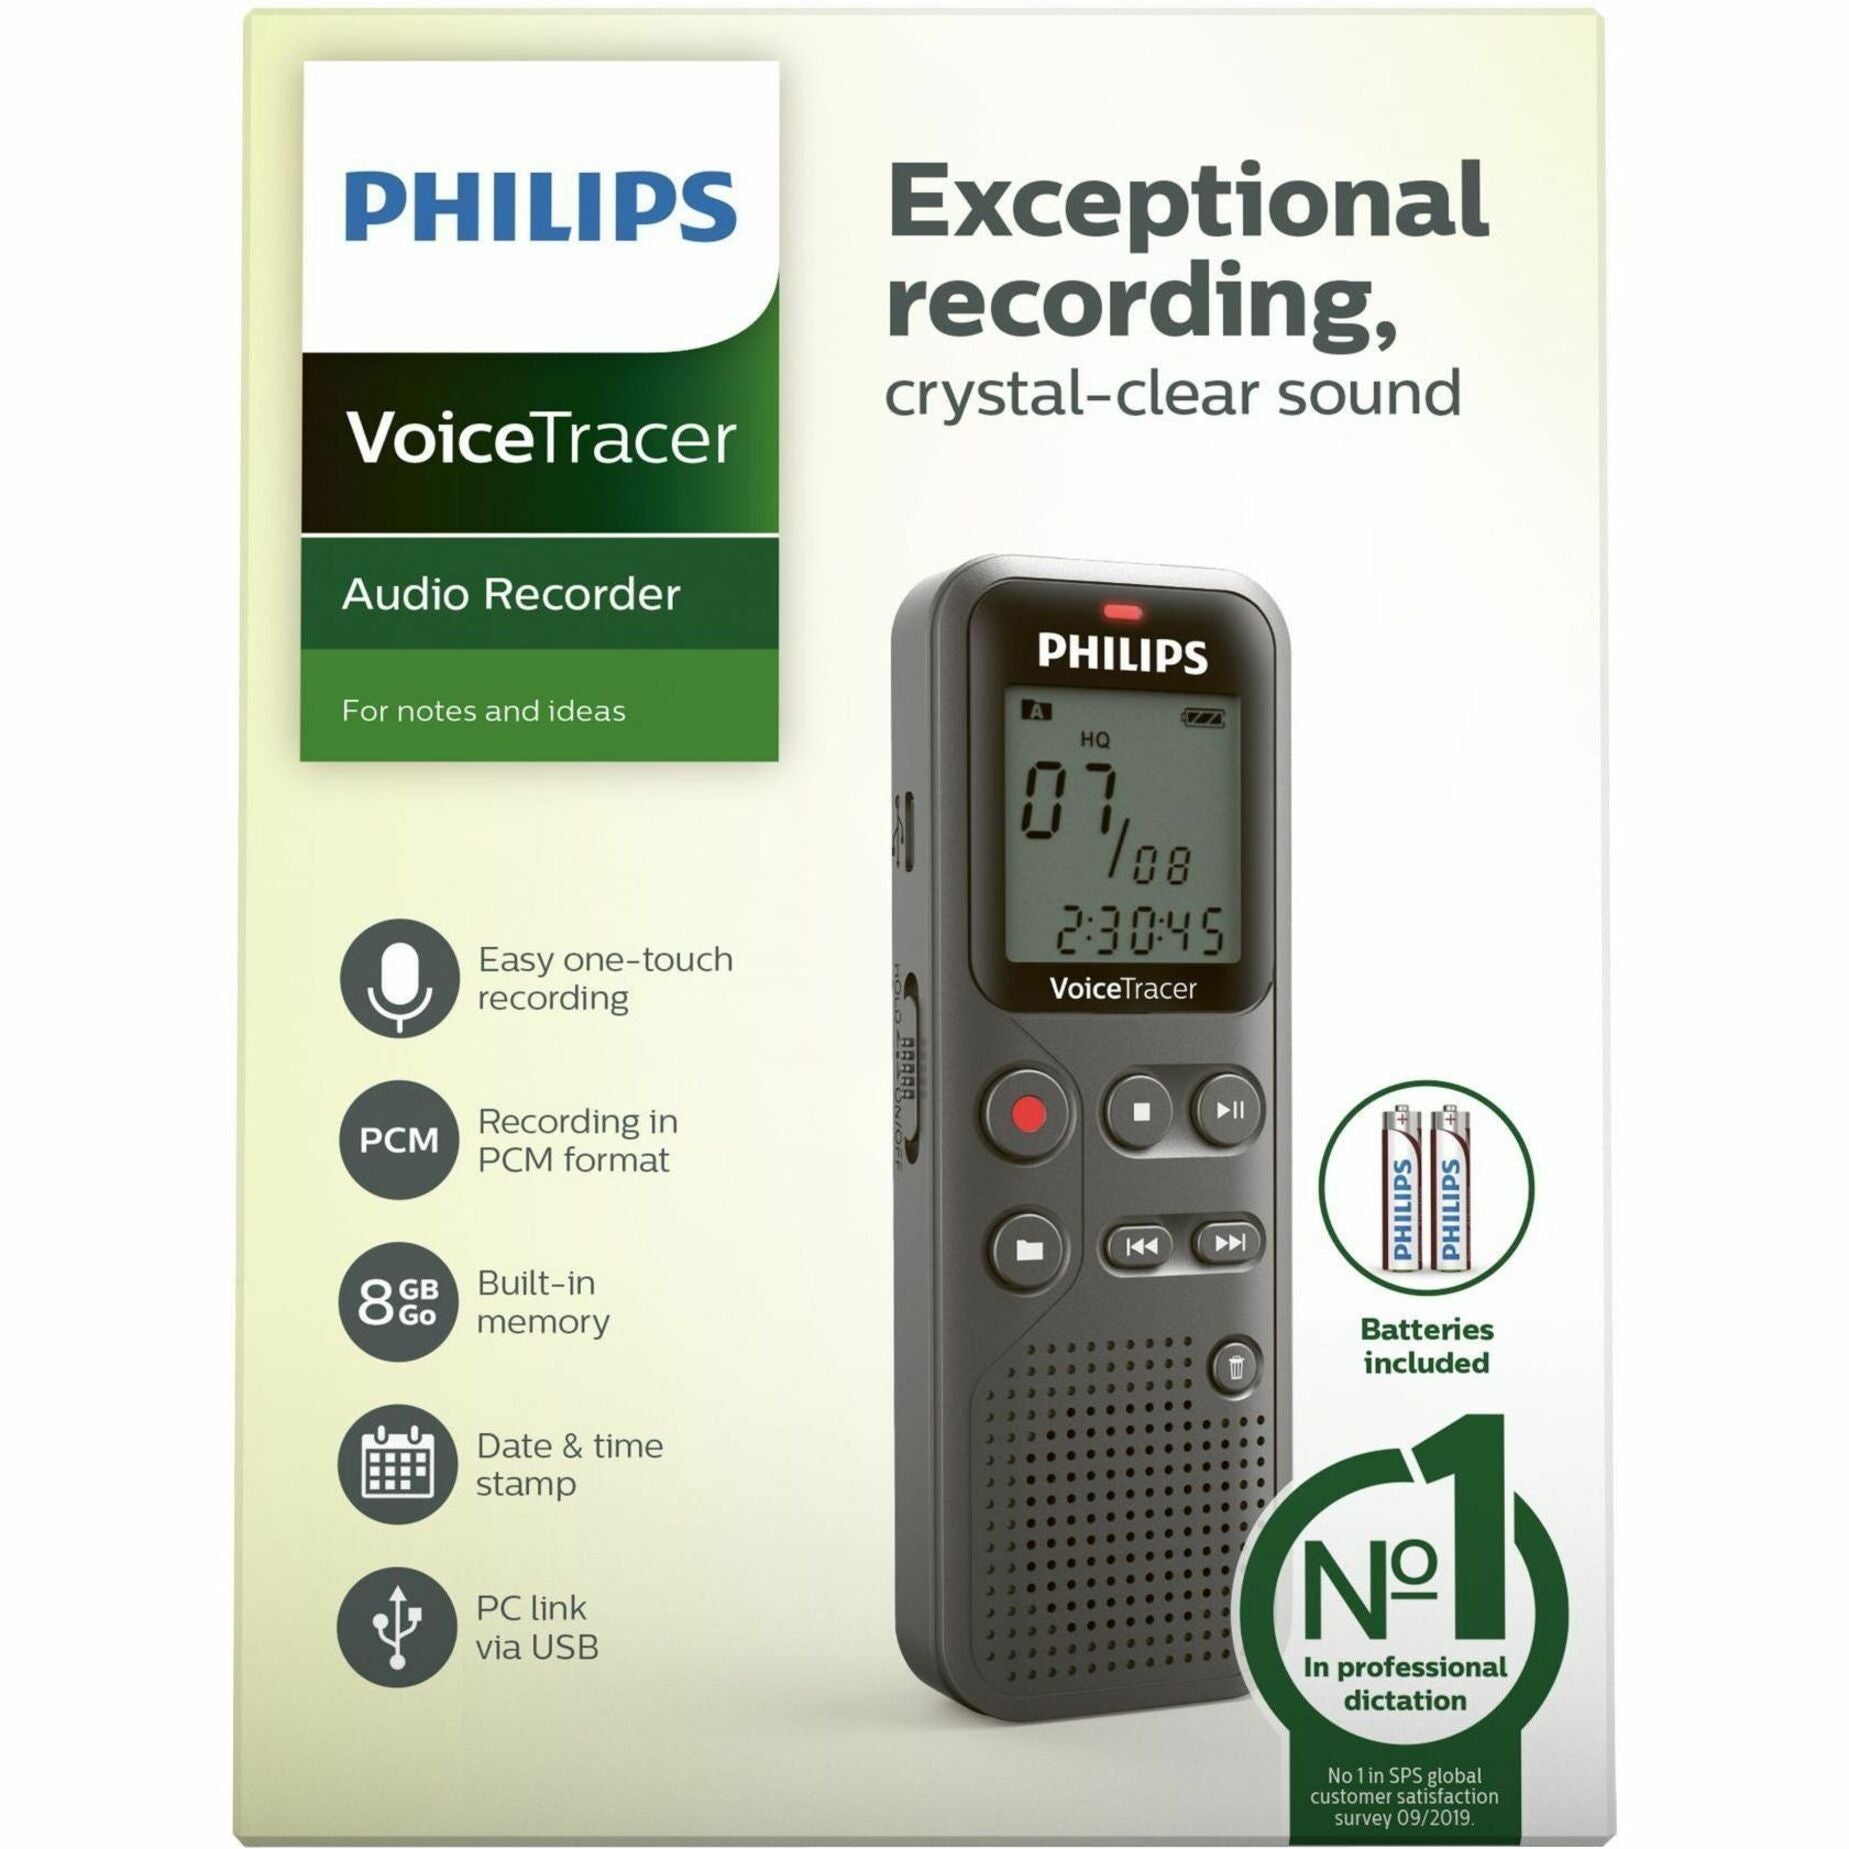 Philips DVT1120 VoiceTracer 8GB Digital Voice Recorder, 46 Hour Recording, LCD Screen